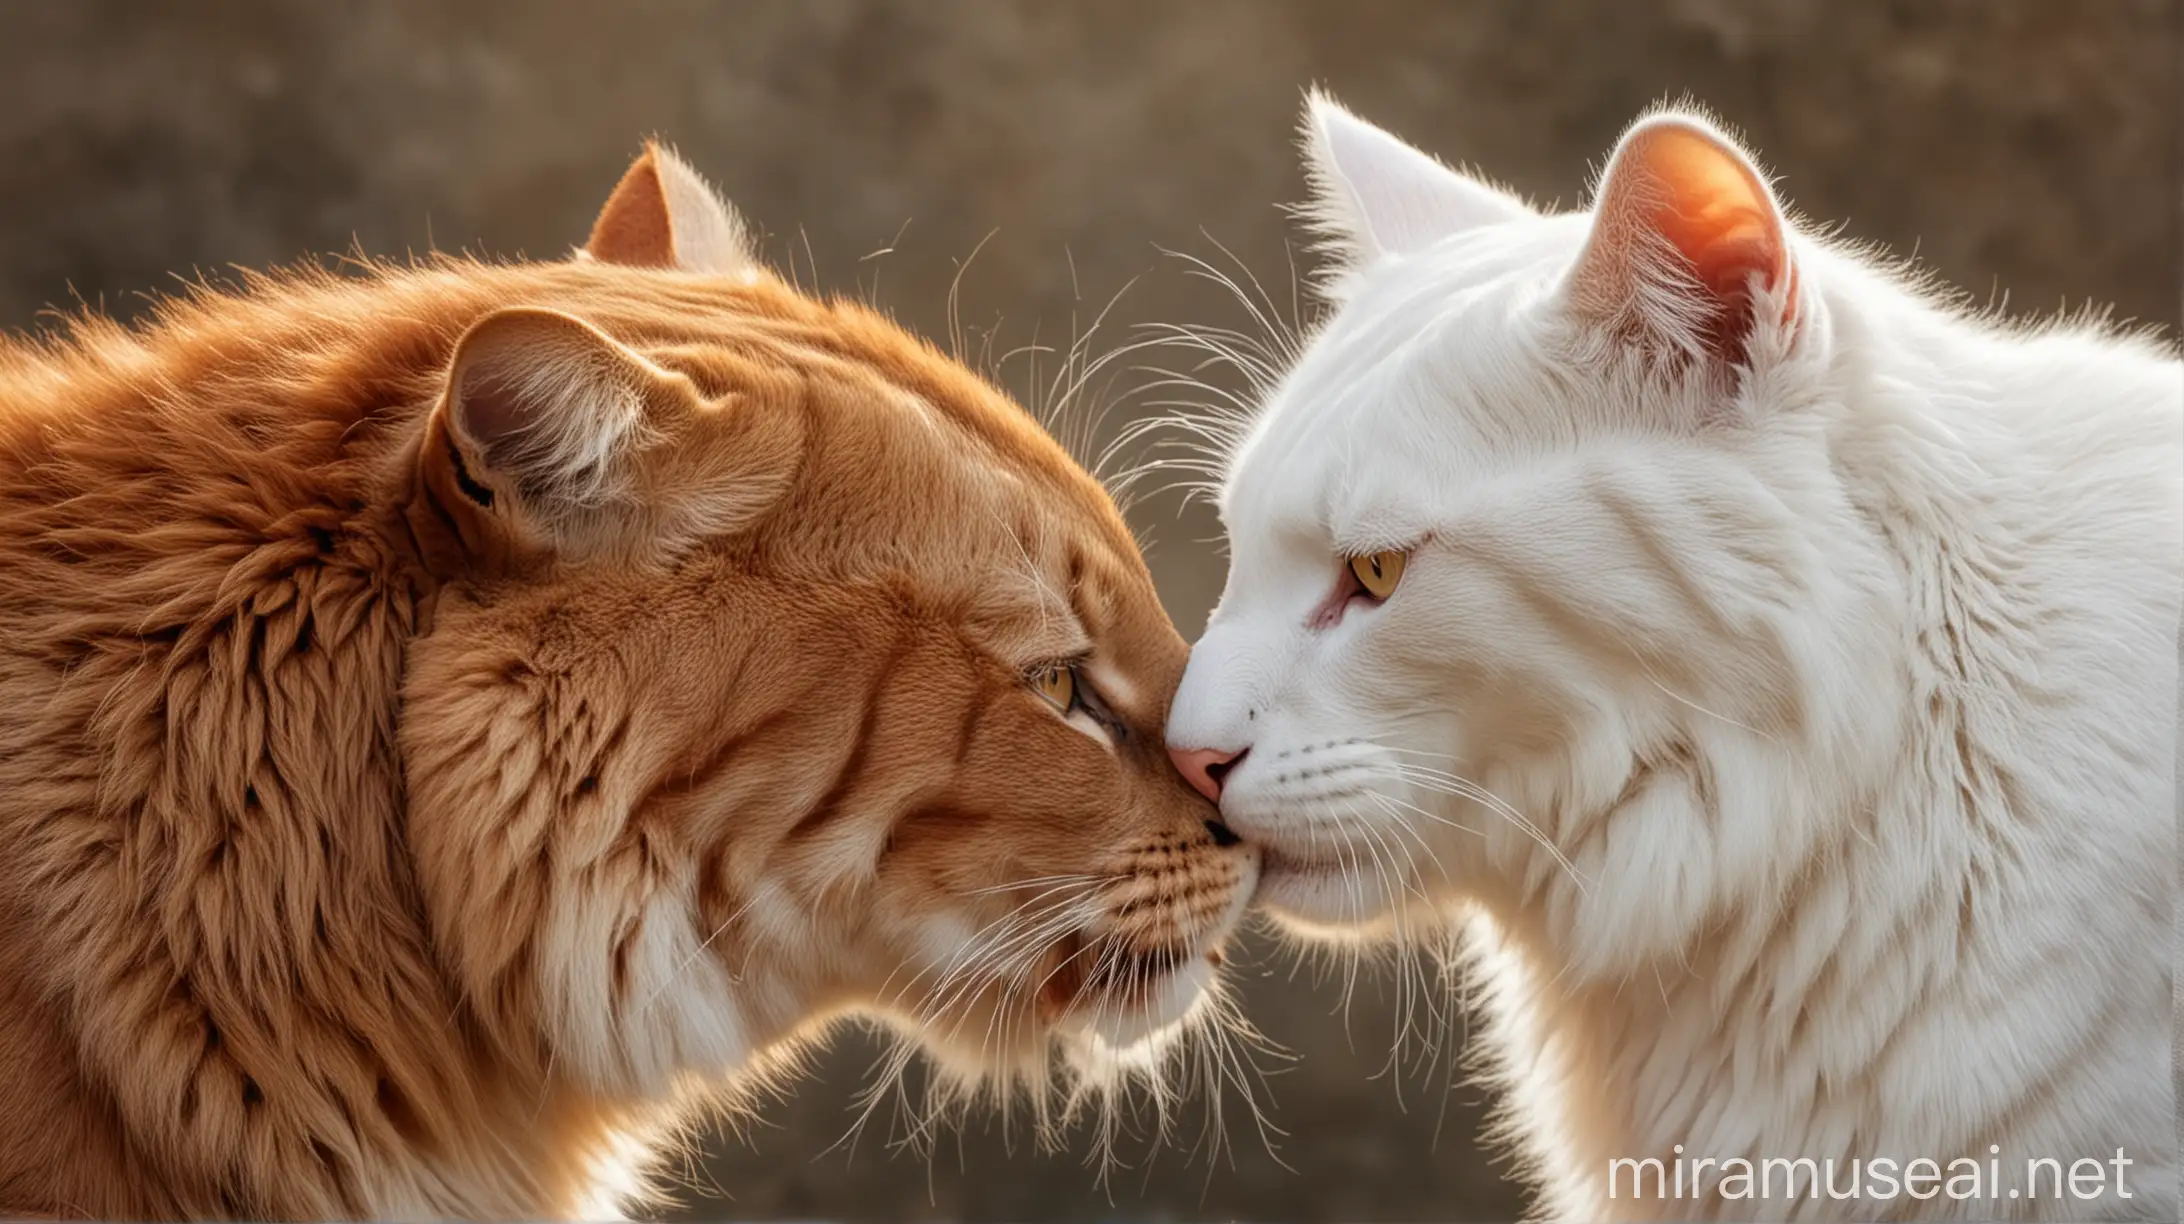 Red Big Cat and White Cat Touching Noses Affectionately